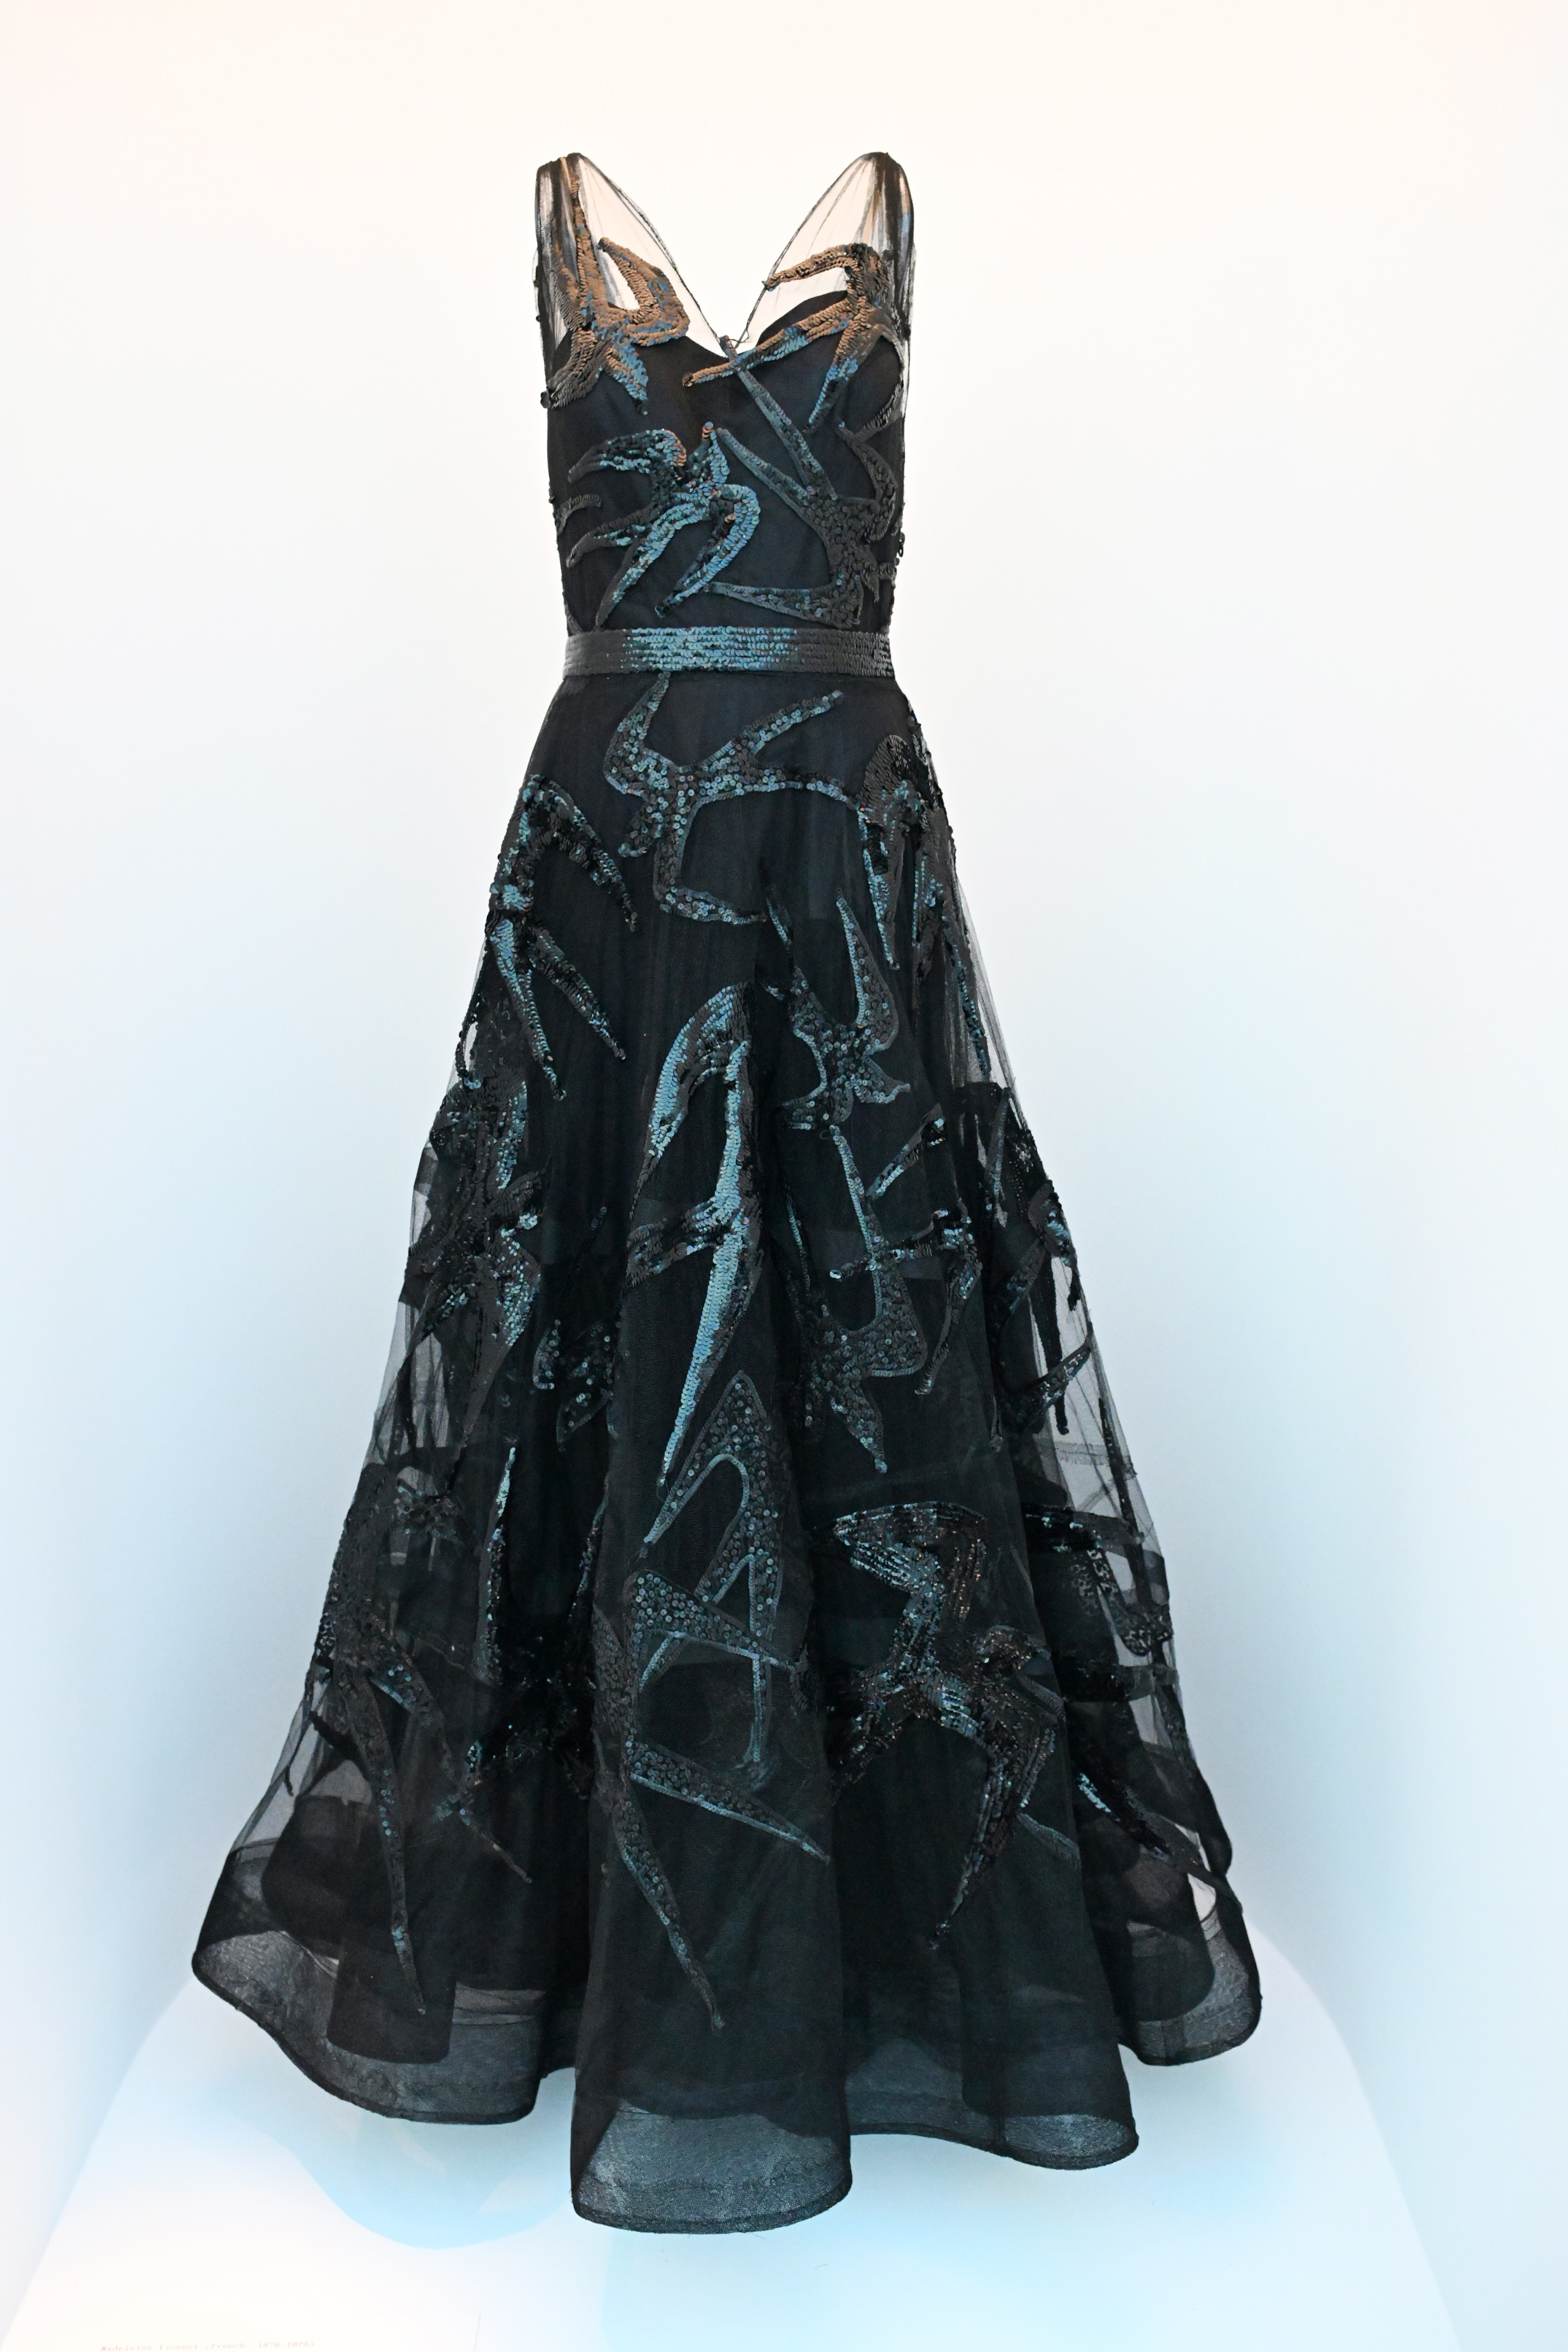 Elegant black evening gown with intricate lace detail on a mannequin. No persons present